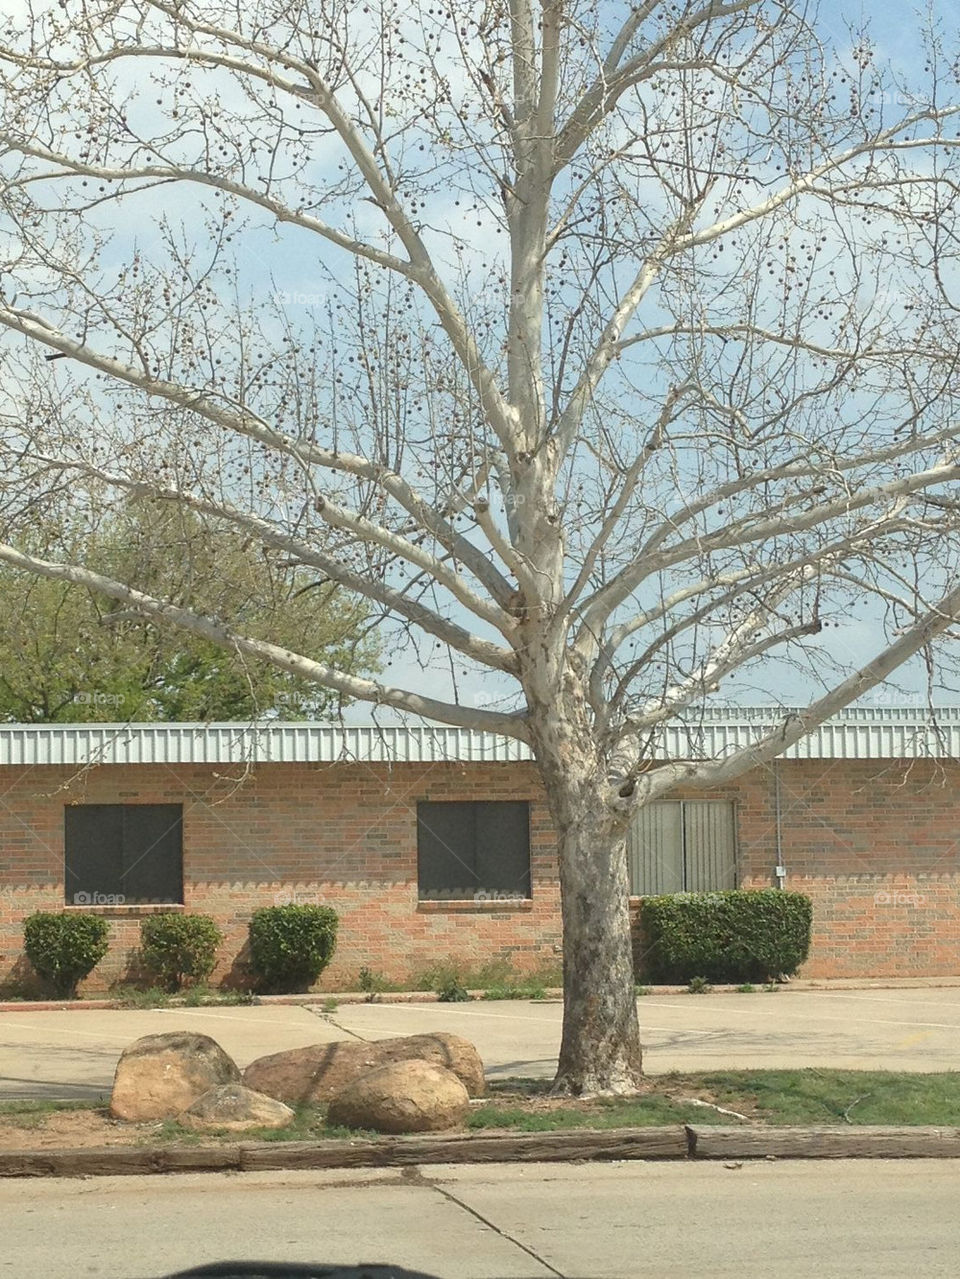 A single tree in front of a building.